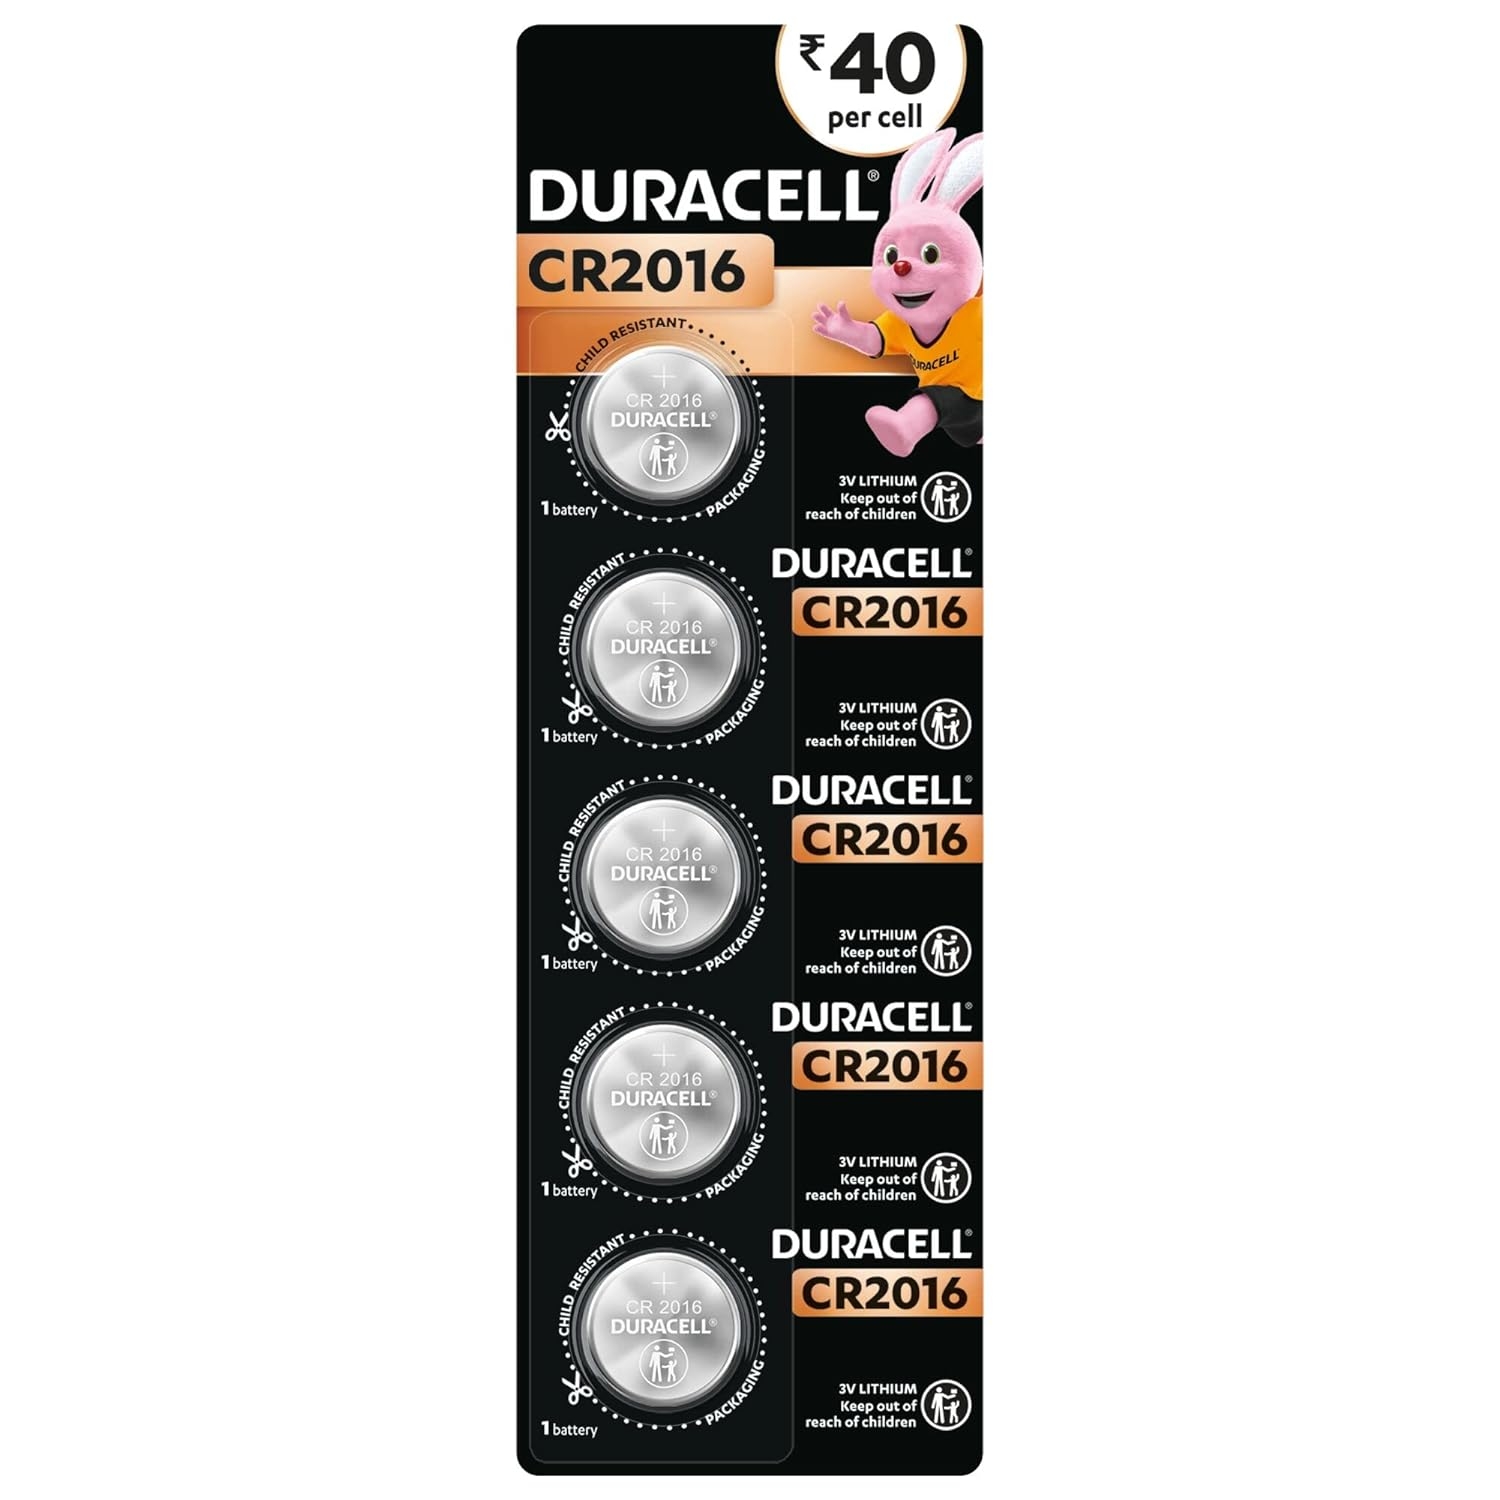 Duracell Specialty CR2016 Lithium Coin Battery 3V, 5 pcs for use in keyfobs, Scales, wearables & Medical Devices